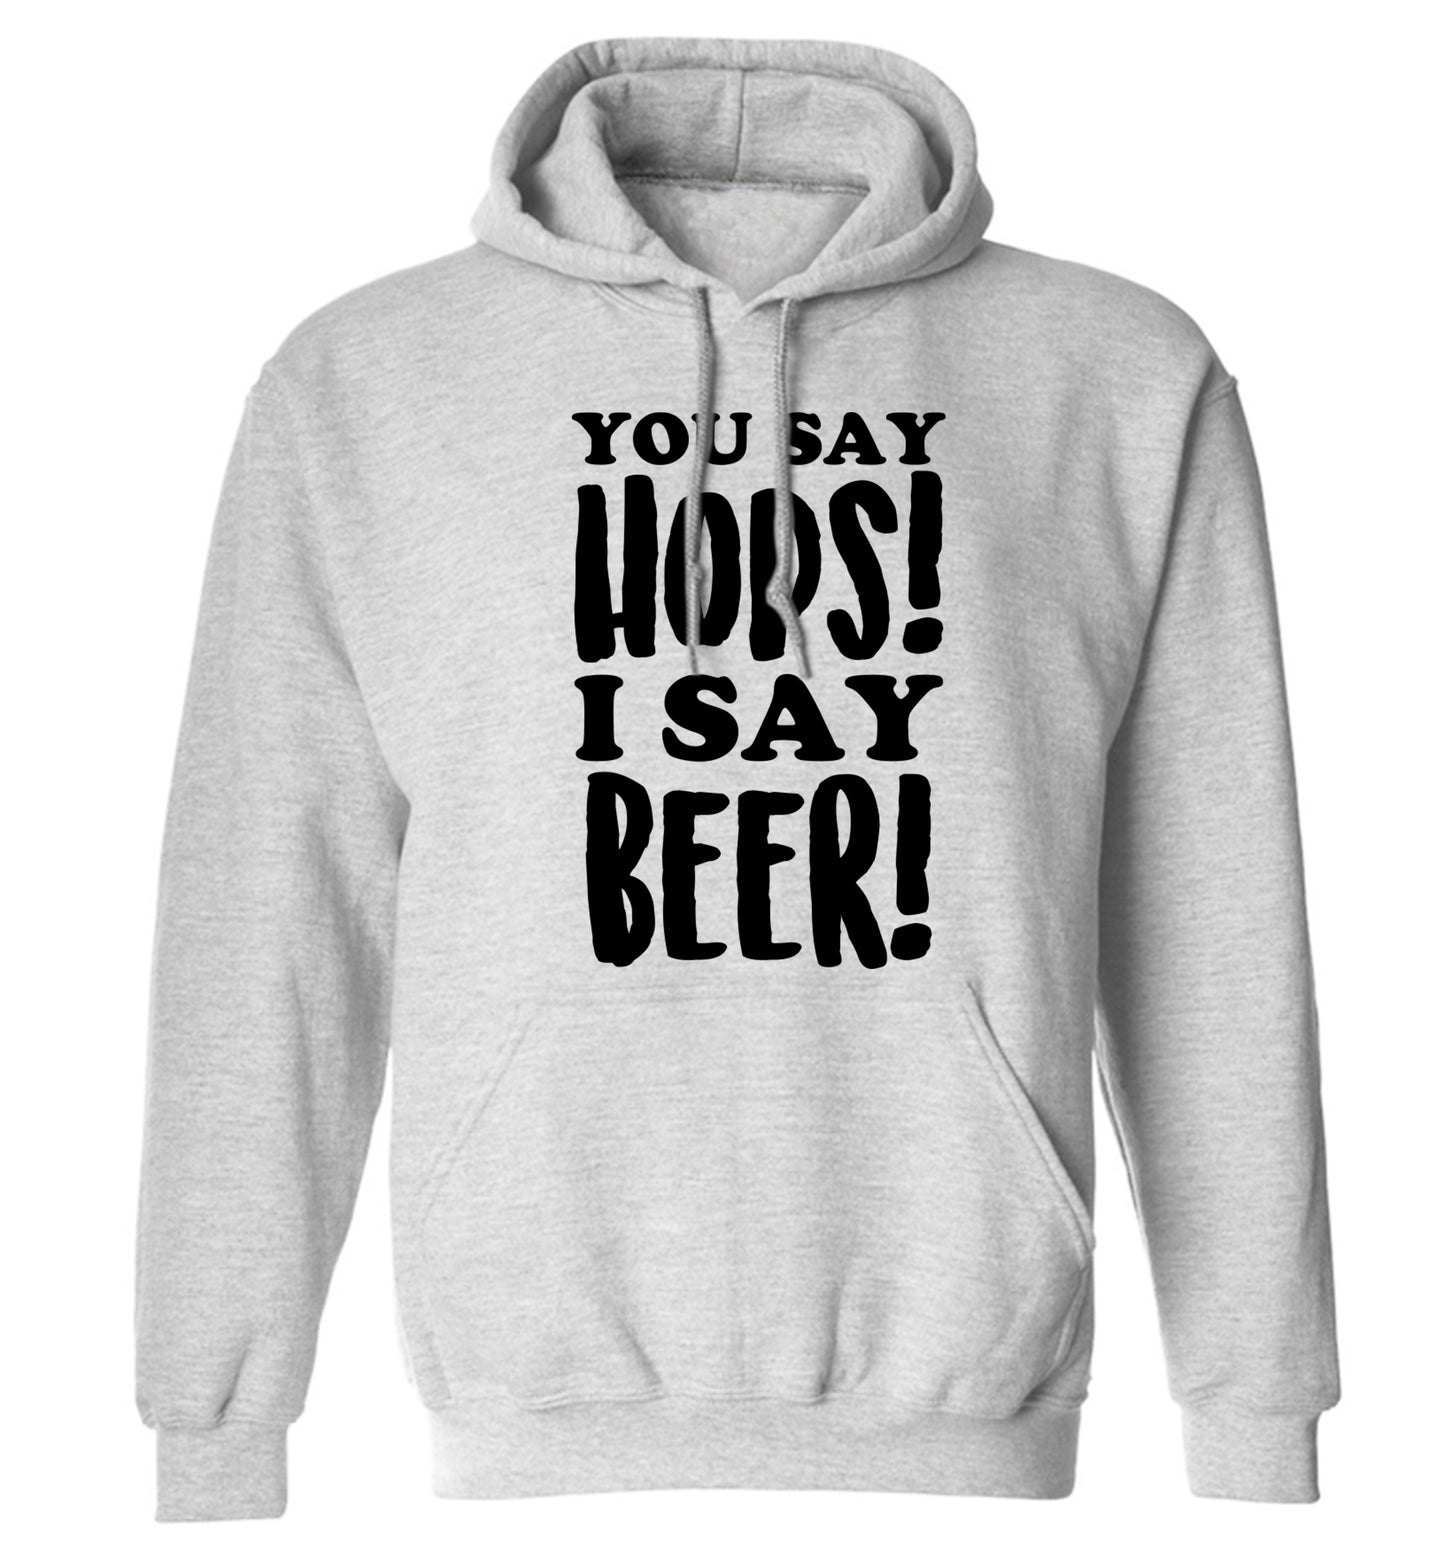 You say hops I say beer! adults unisex grey hoodie 2XL